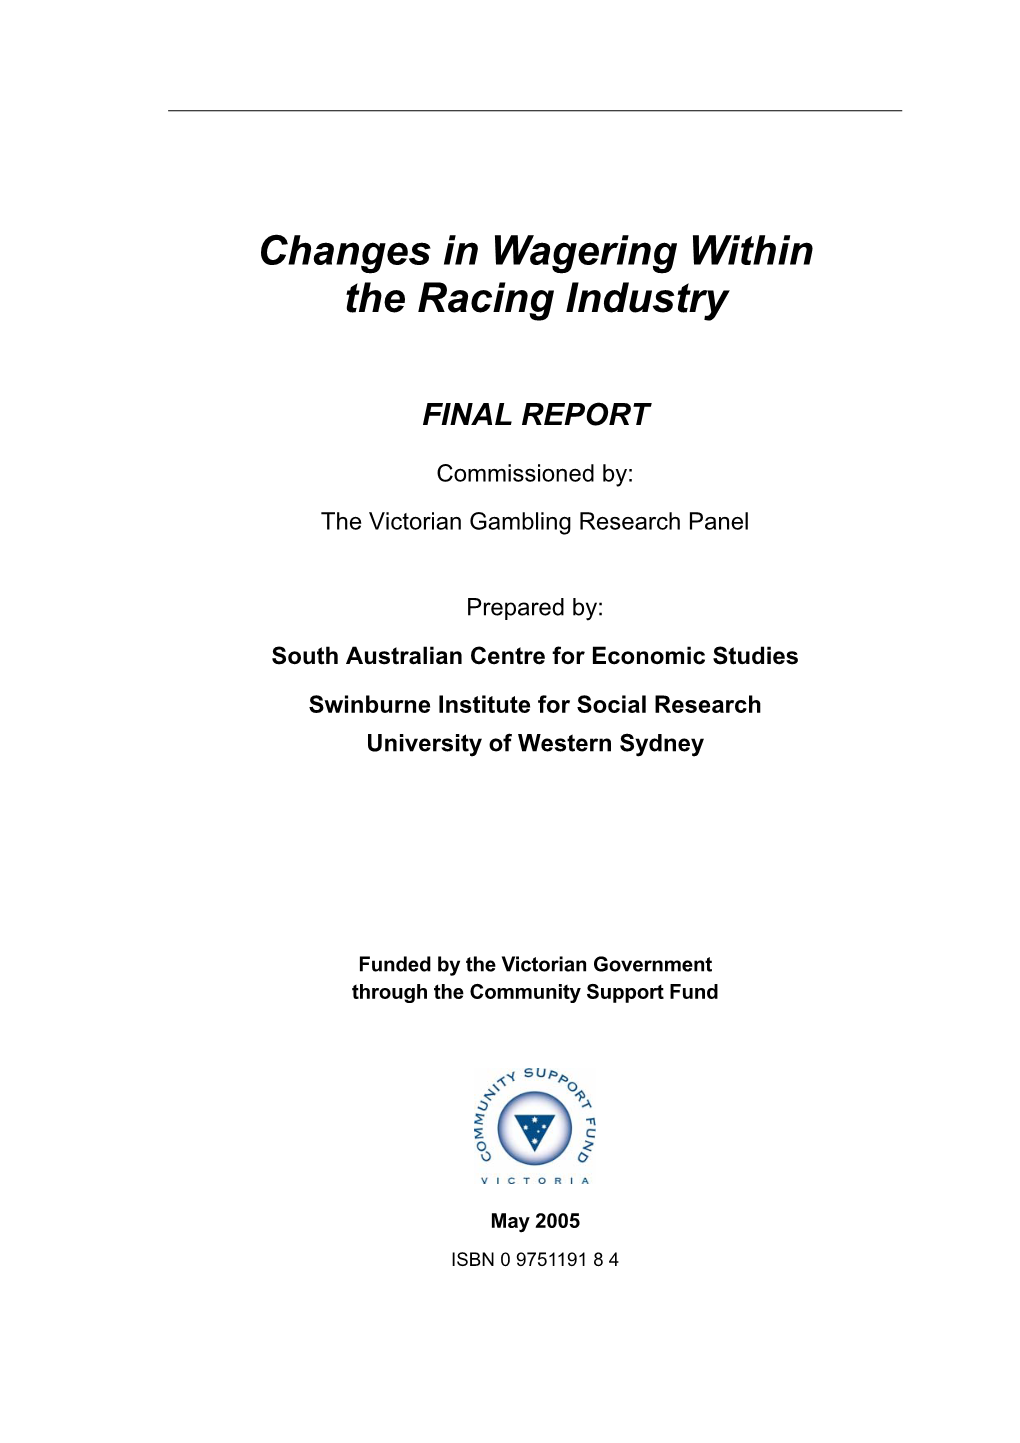 Changes in Wagering Within the Racing Industry